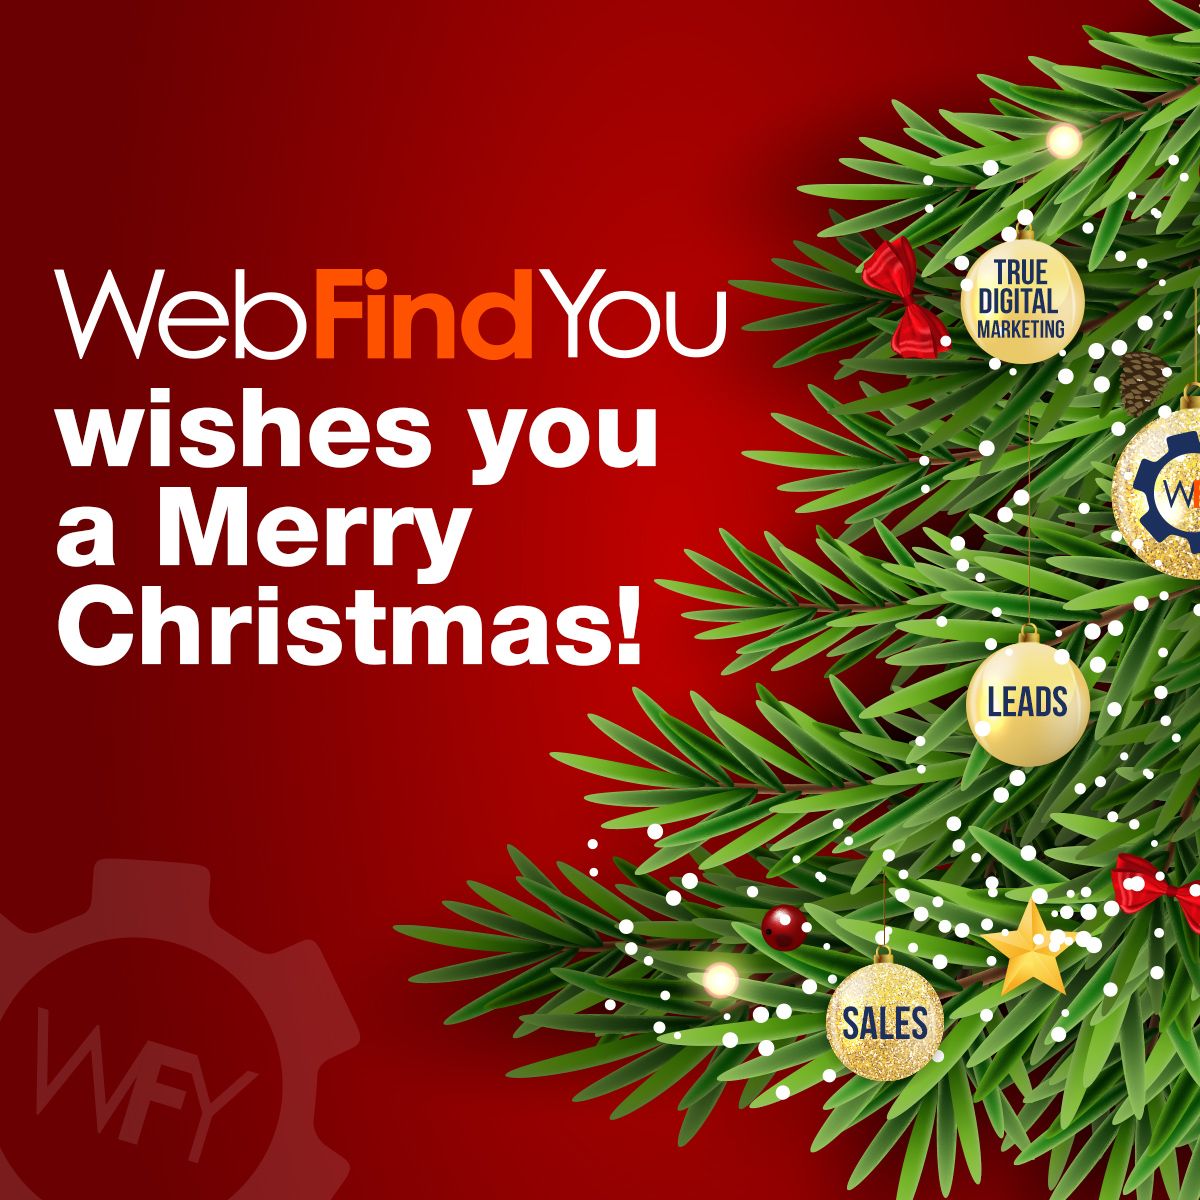 WebFindYou wishes you a Merry Christmas!